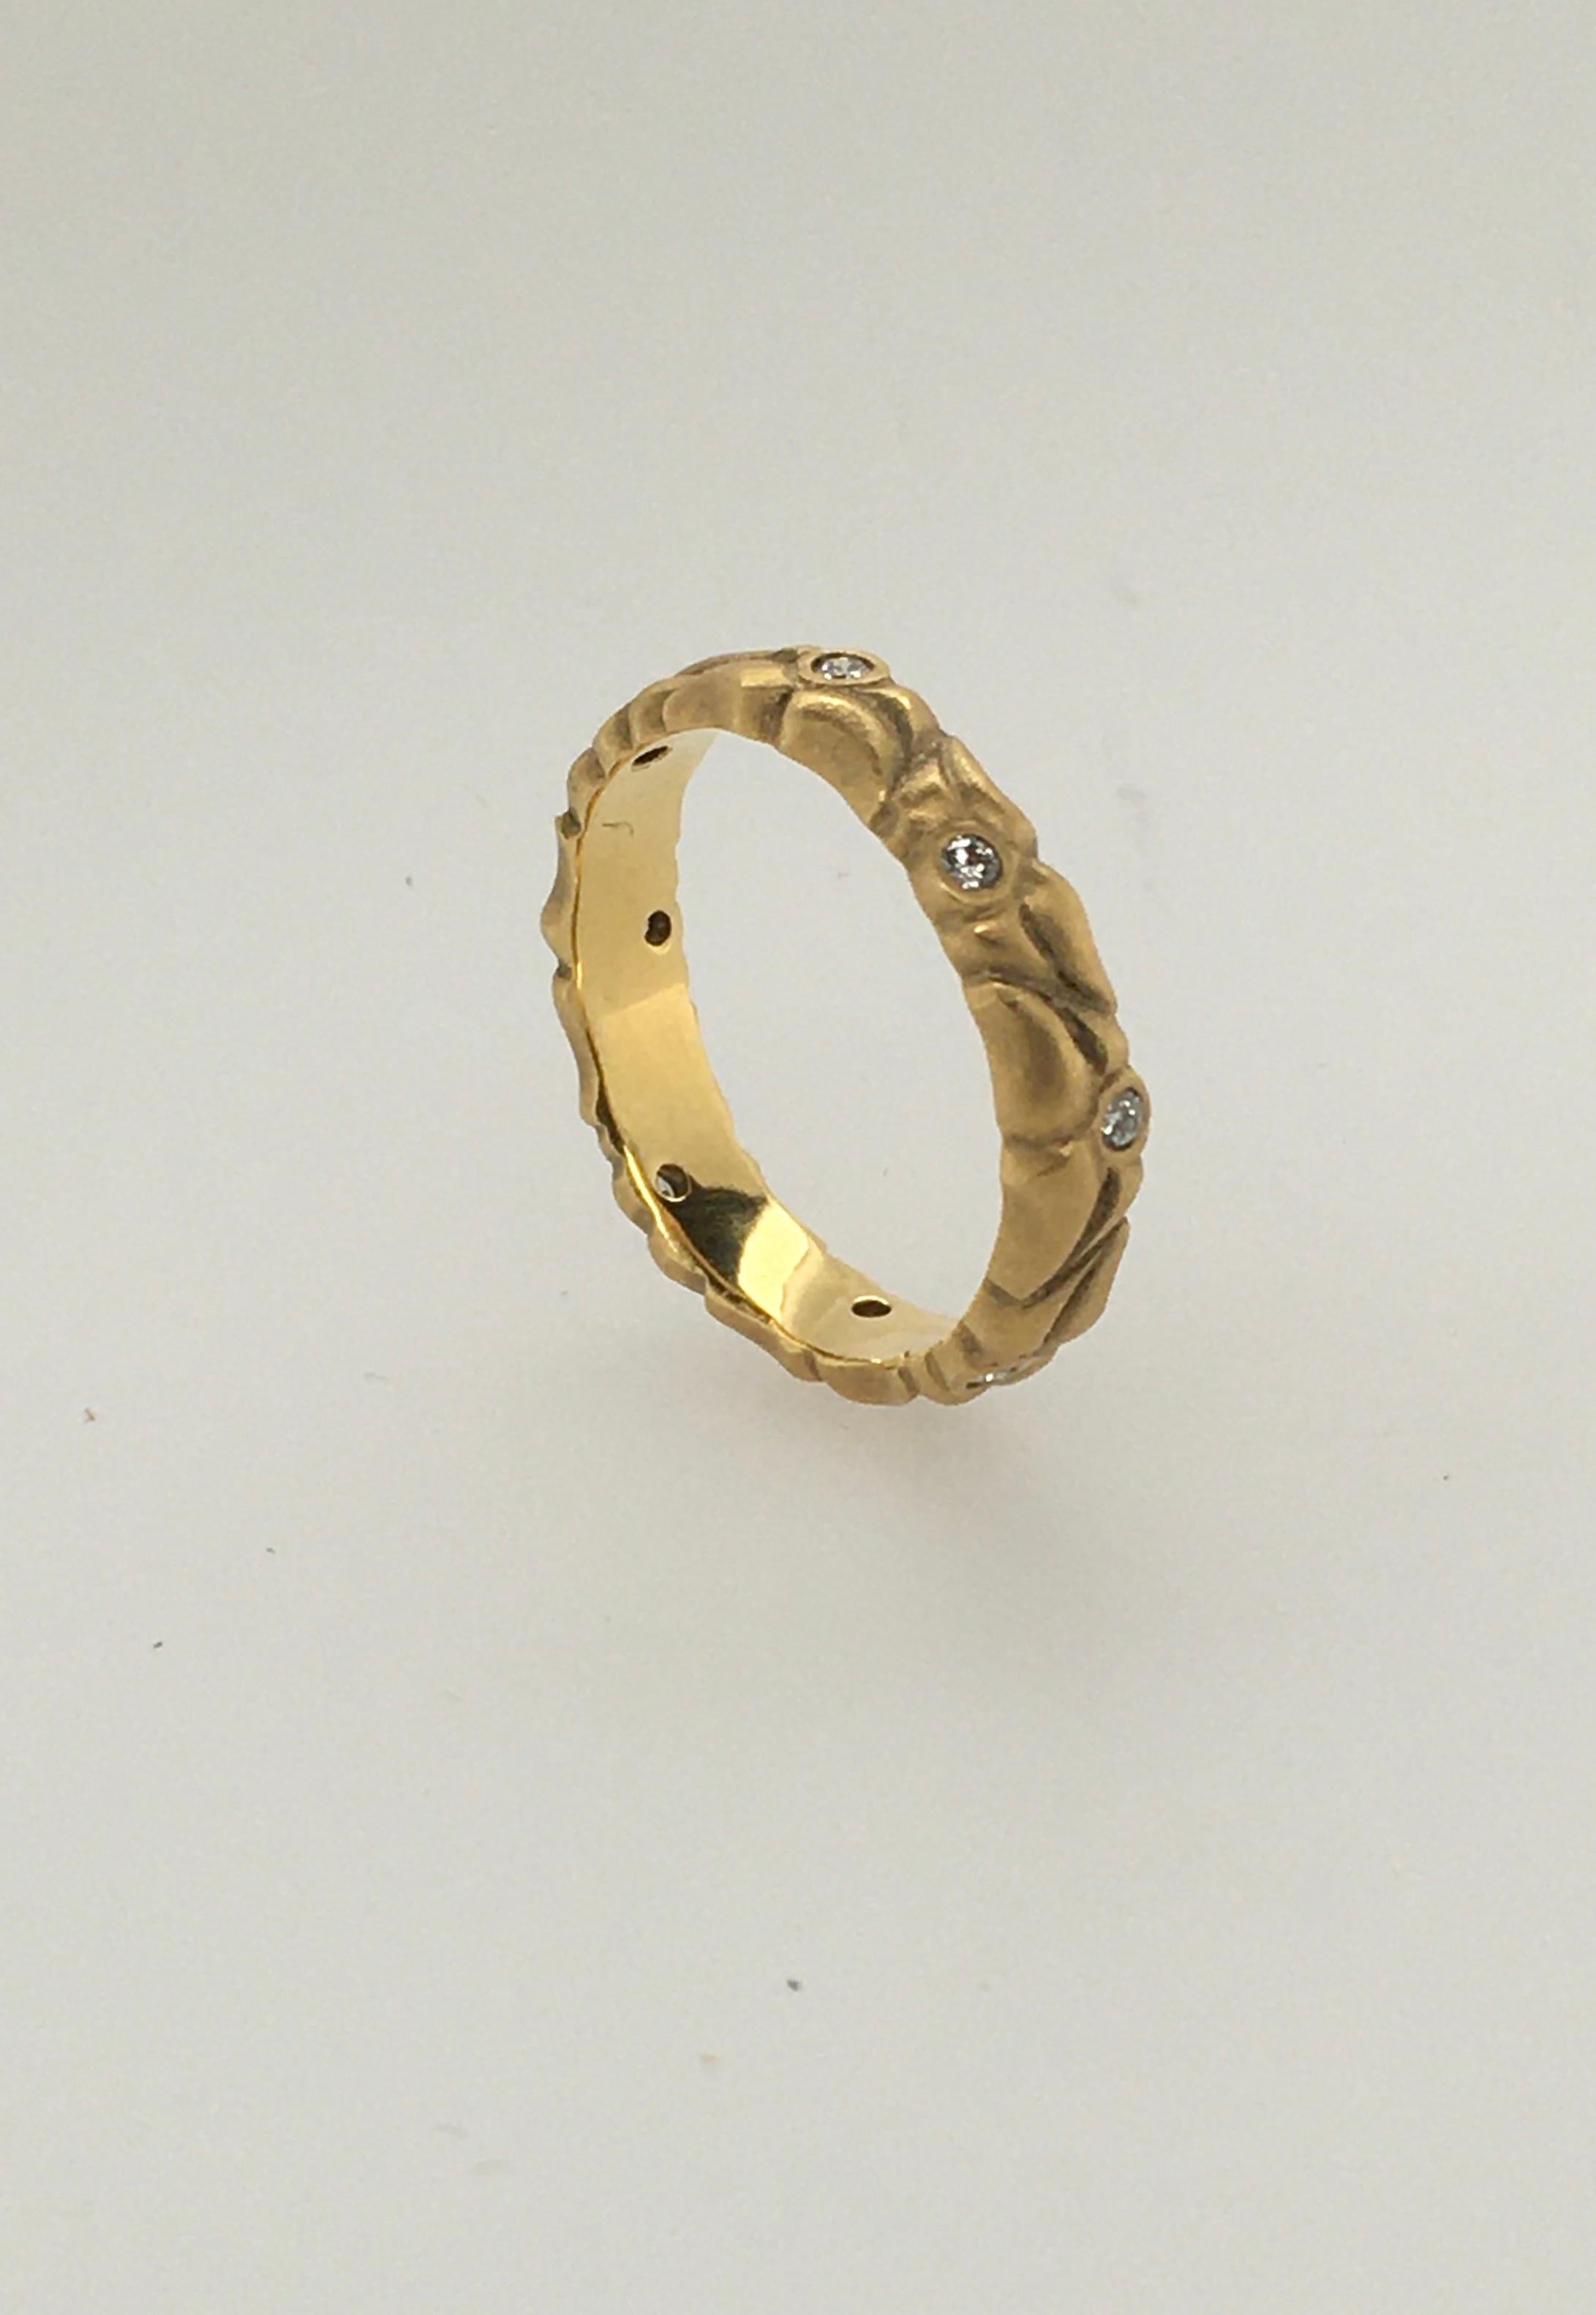 This distinctive ring is a 3.7 mm 18K yellow gold deeply carved leaf wedding band with eight  .12 CT diamonds.  The polished interior displays her imprint  